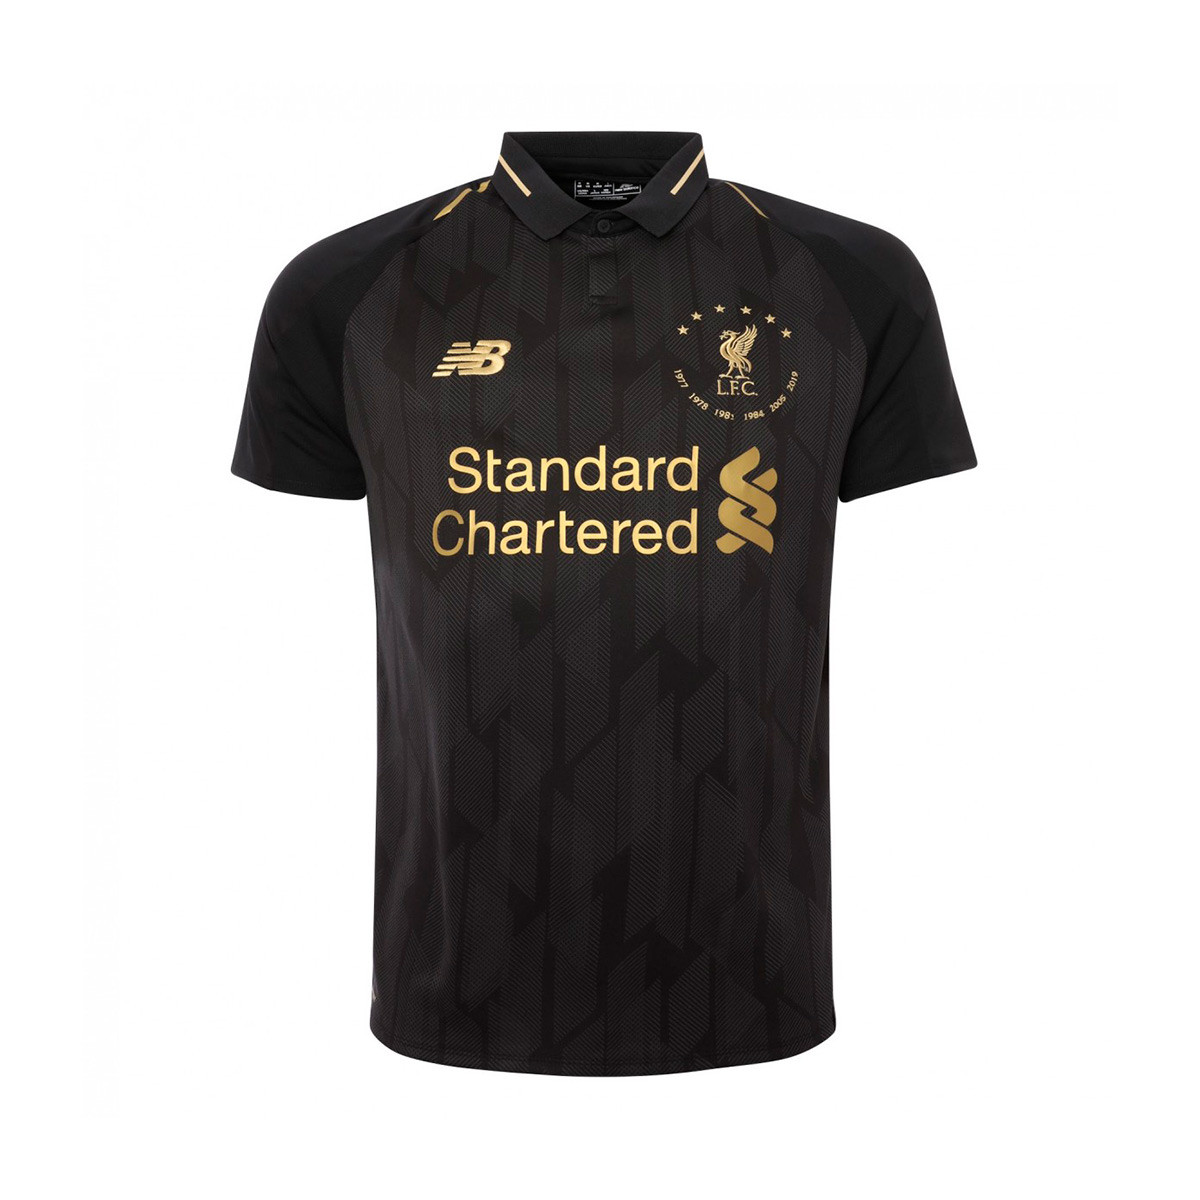 liverpool jersey black and gold